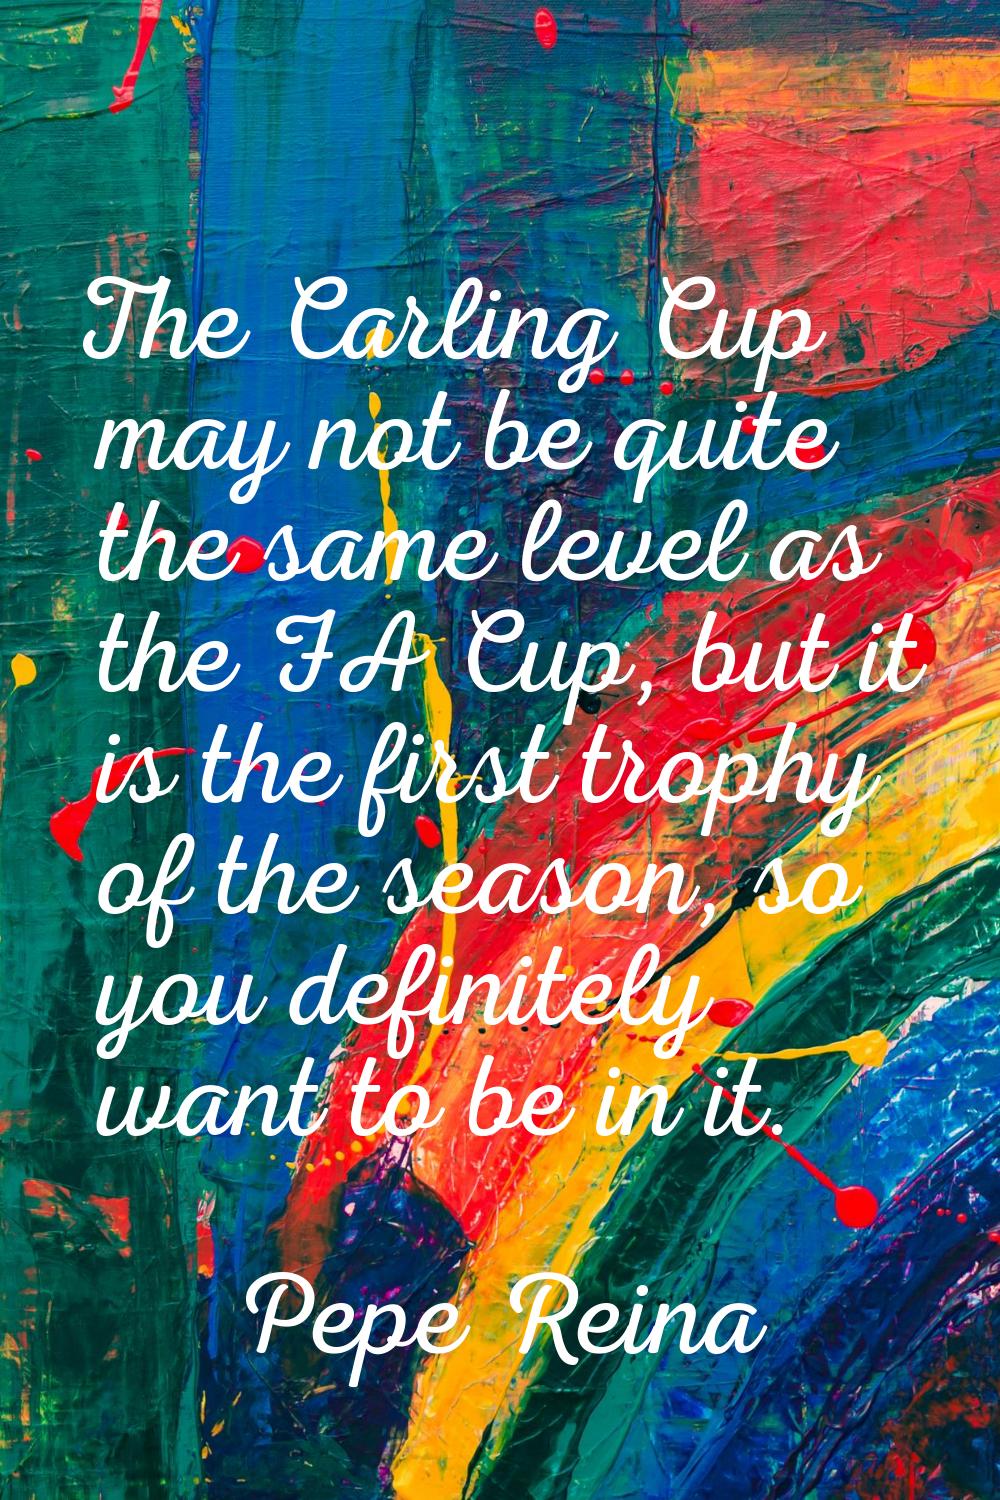 The Carling Cup may not be quite the same level as the FA Cup, but it is the first trophy of the se